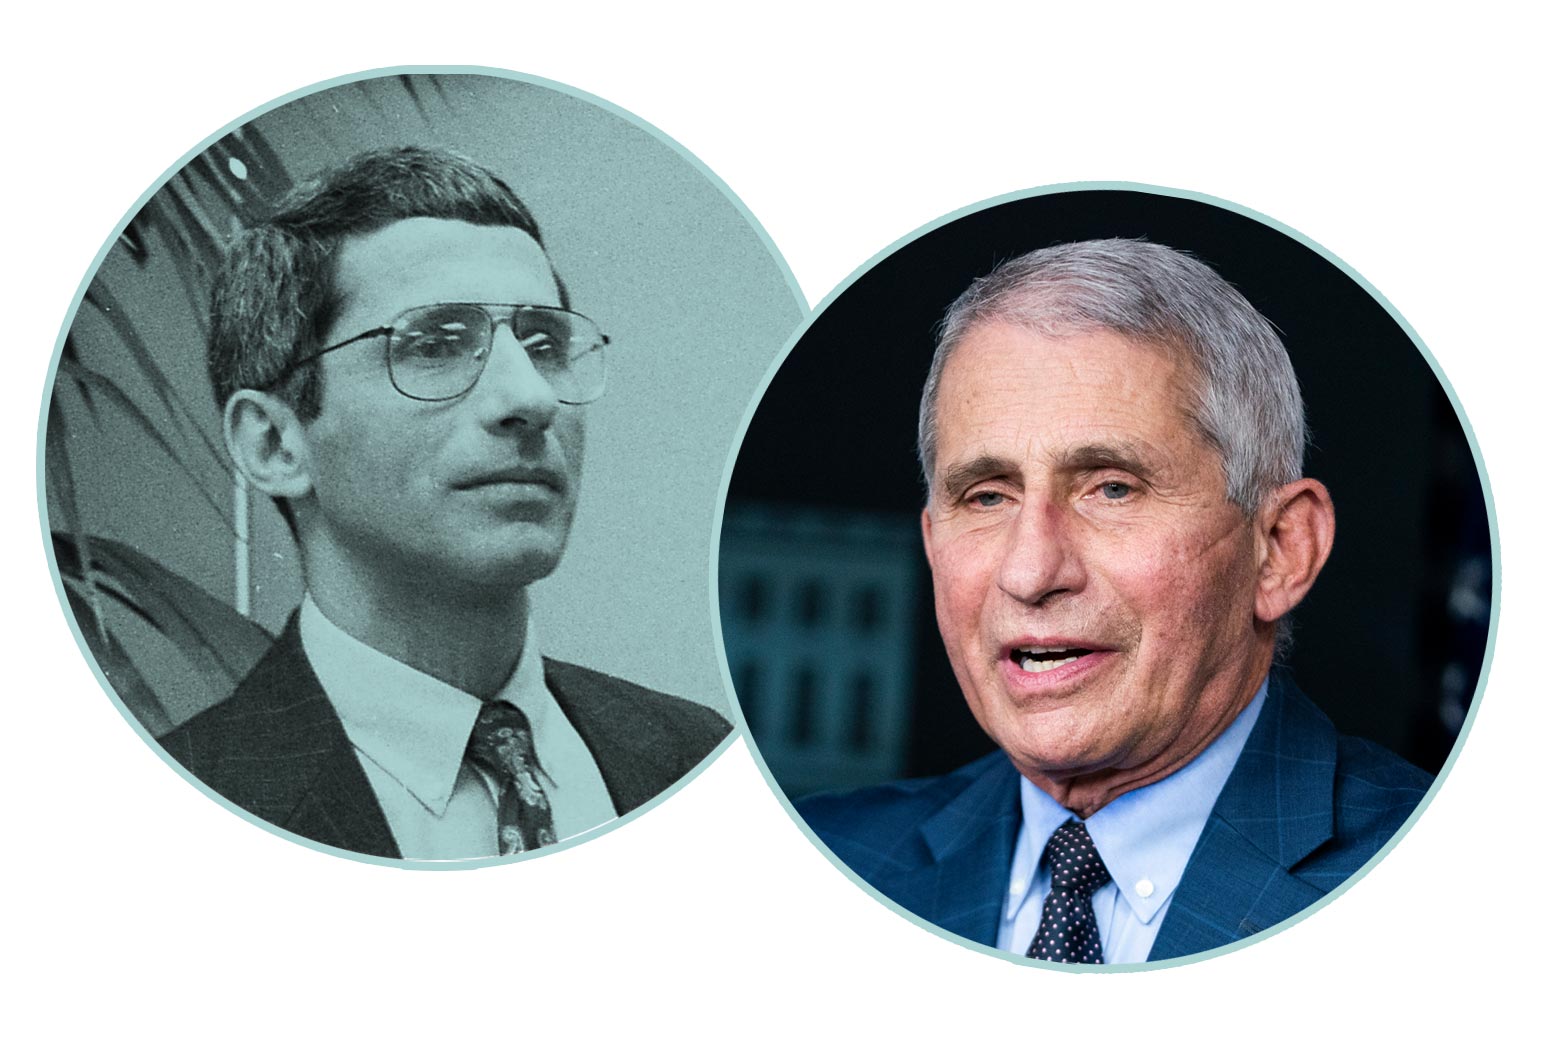 Anthony Fauci, younger and now.